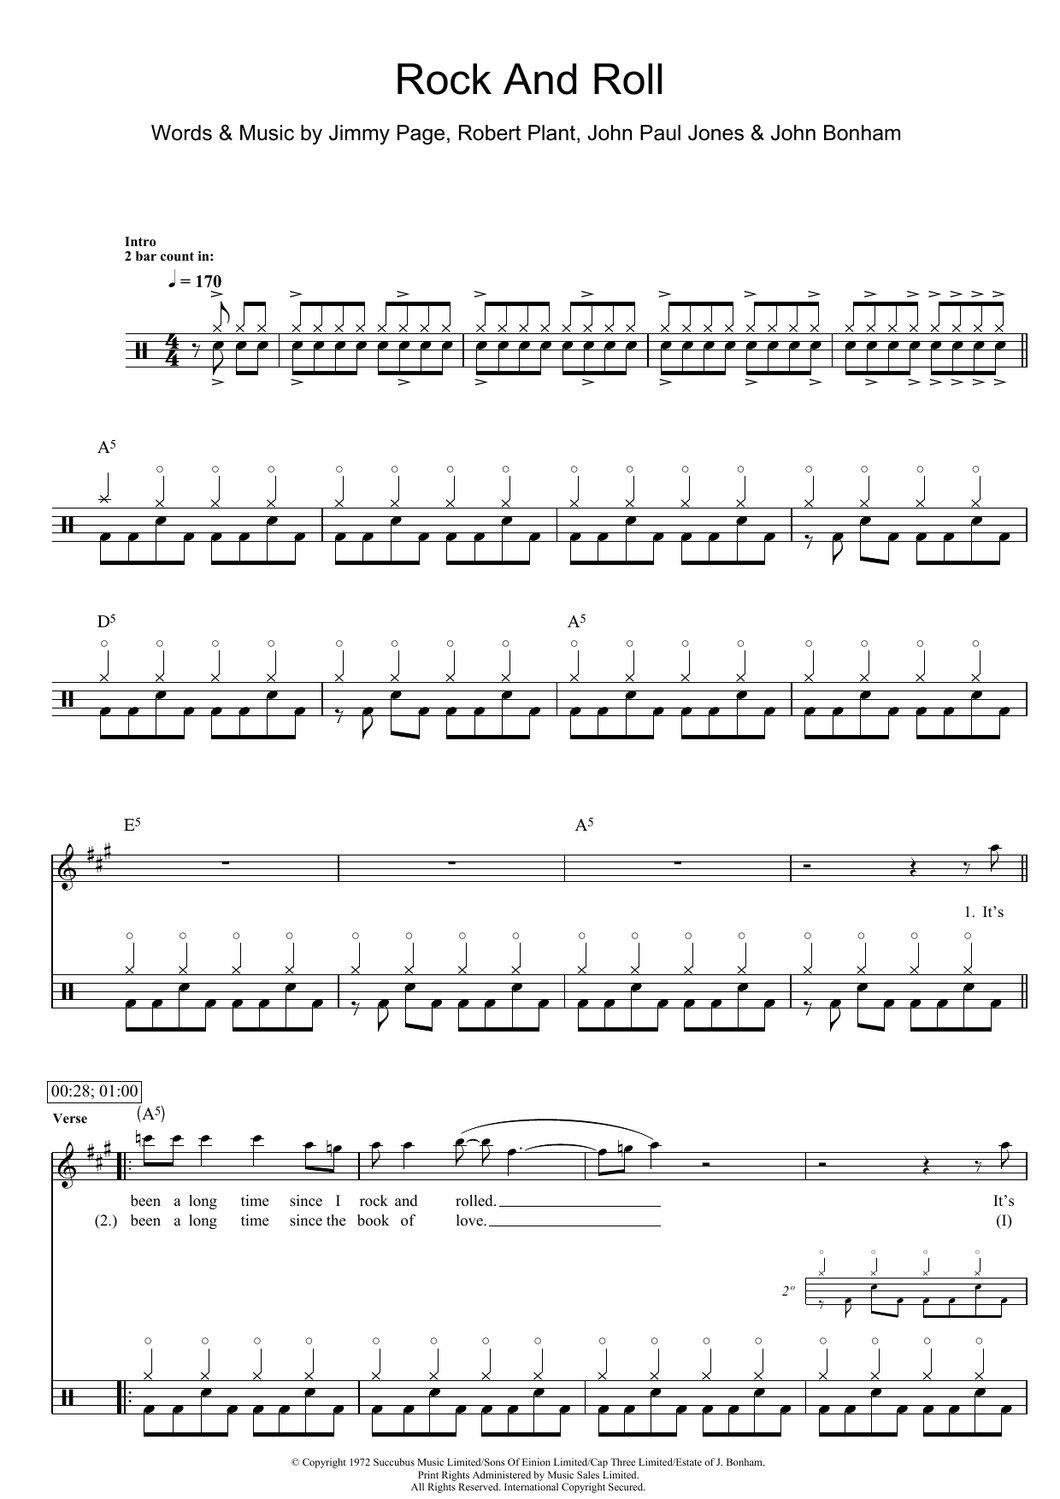 Rock and Roll - Led Zeppelin - Full Drum Transcription / Drum Sheet Music - SheetMusicDirect D